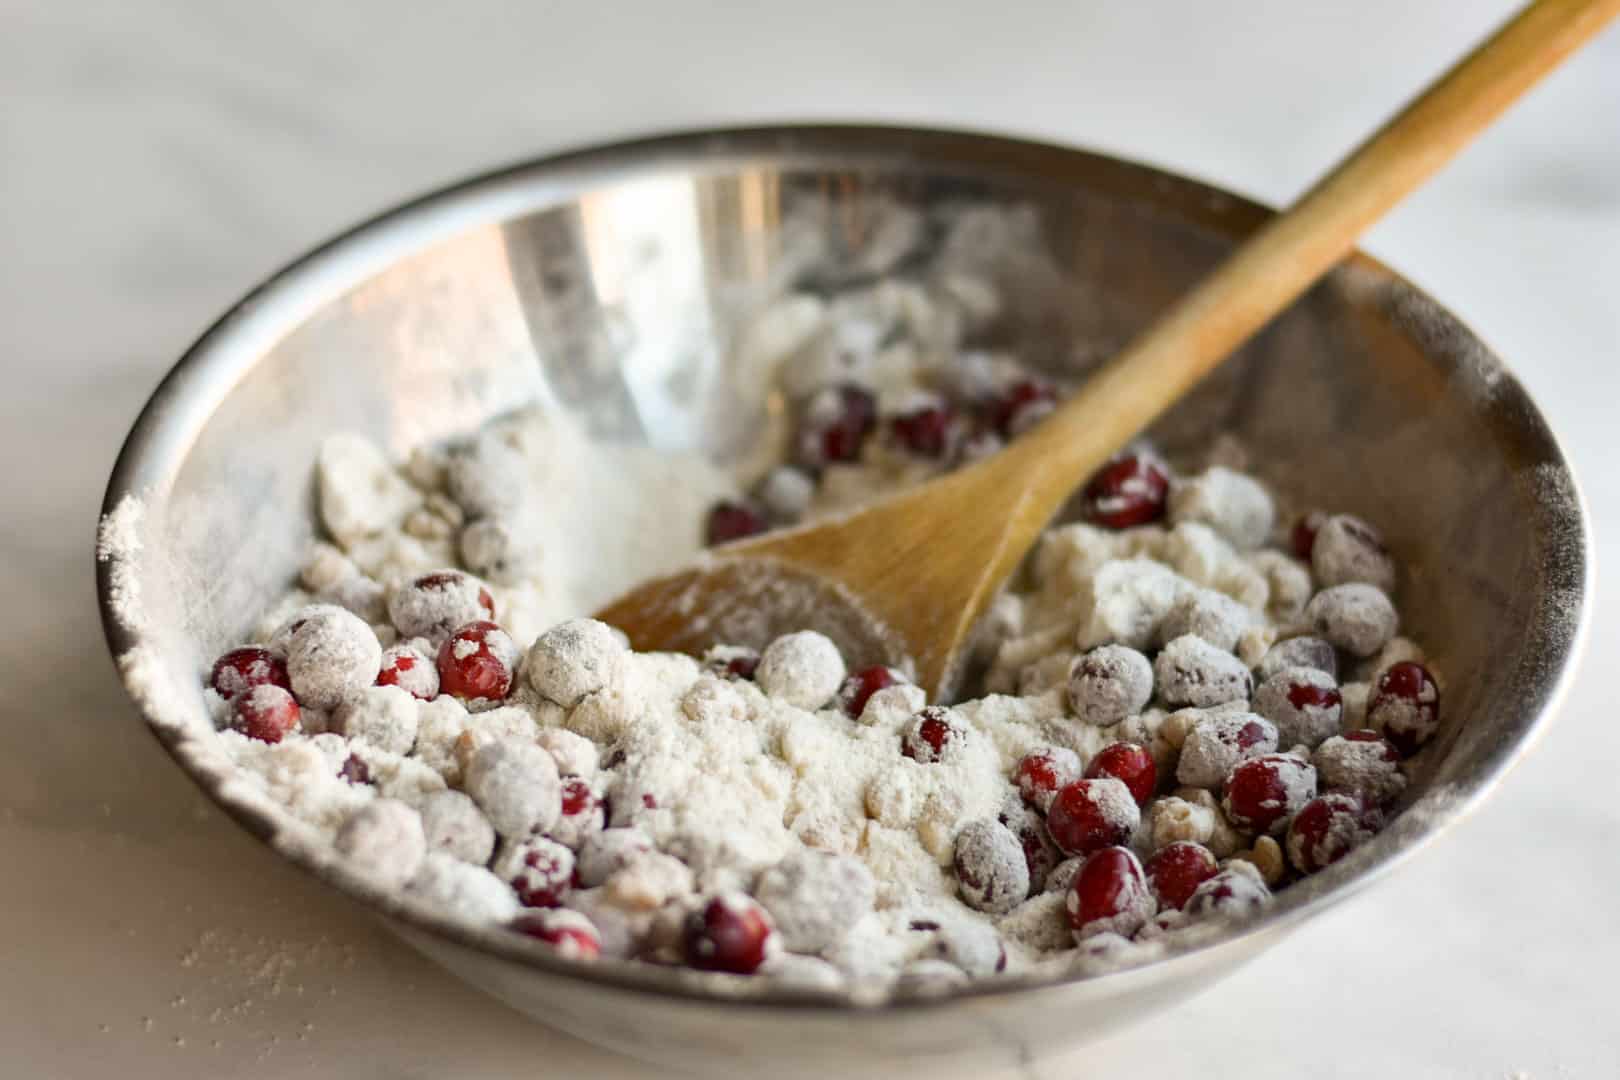 dry ingredients and cranberries in bowl with wooden spoon